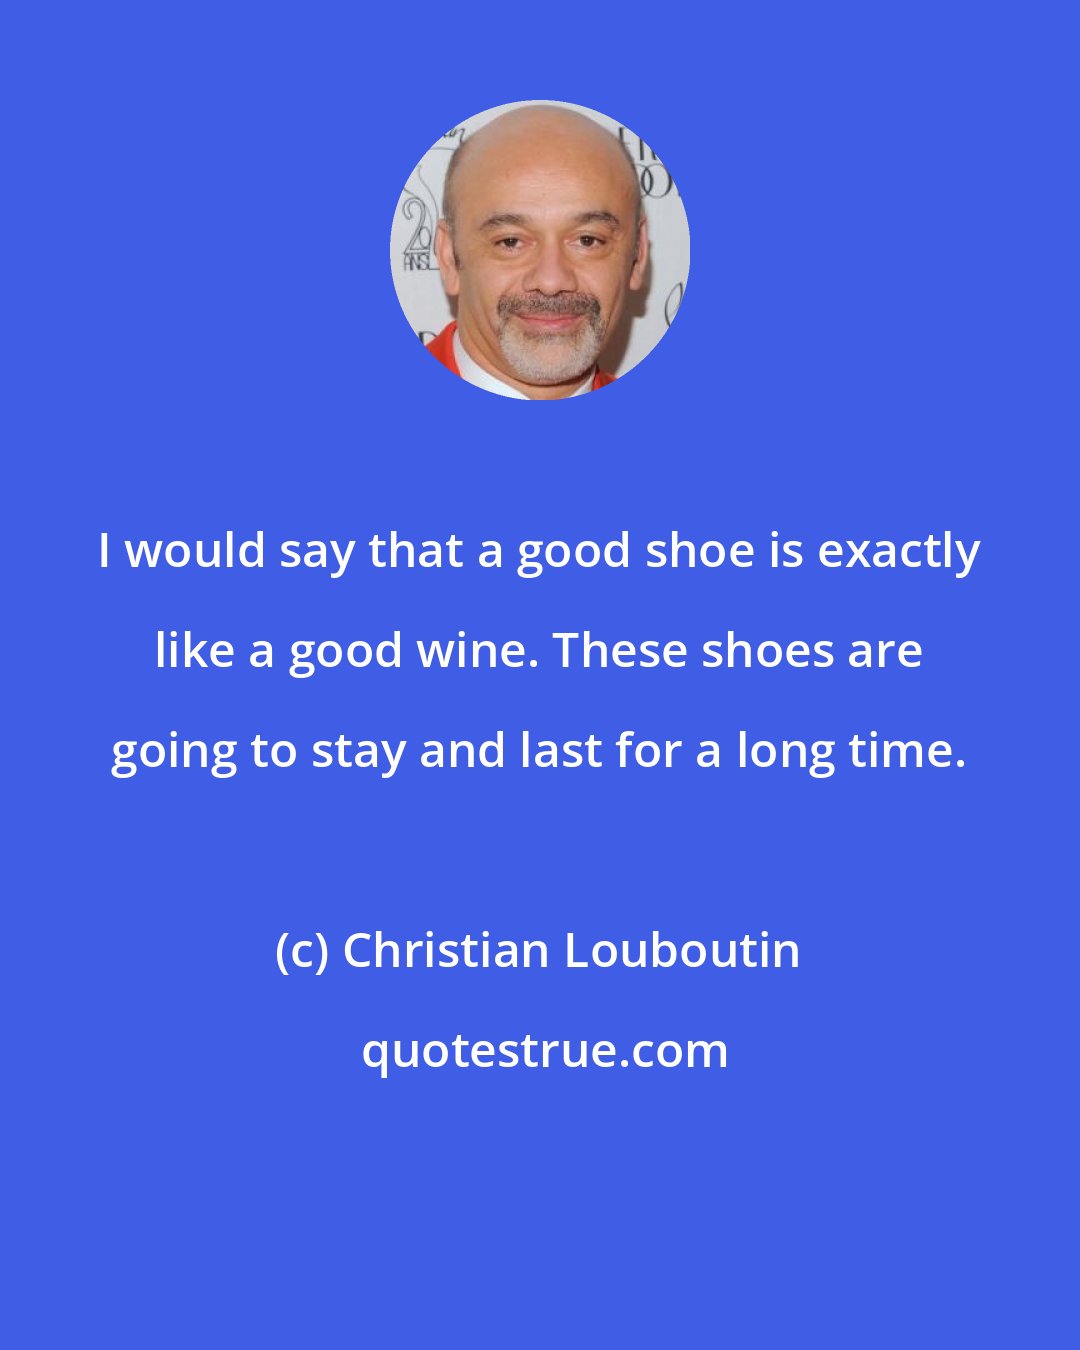 Christian Louboutin: I would say that a good shoe is exactly like a good wine. These shoes are going to stay and last for a long time.